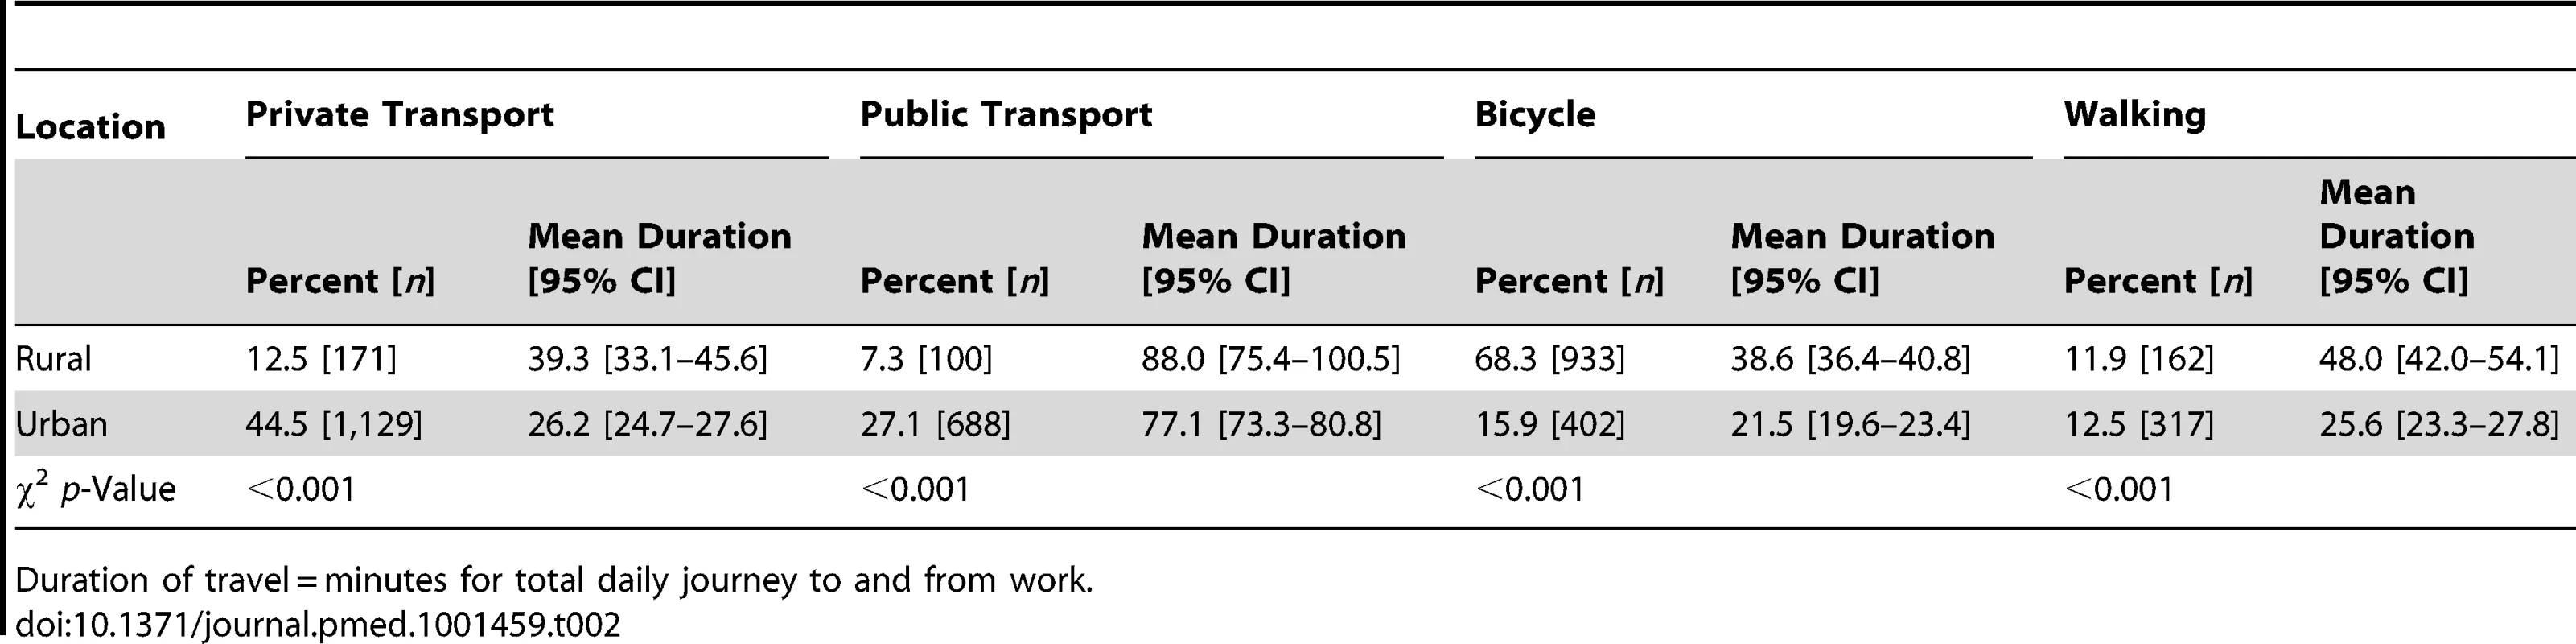 Percent using different travel modes to work and duration of travel in urban and rural dwellers.